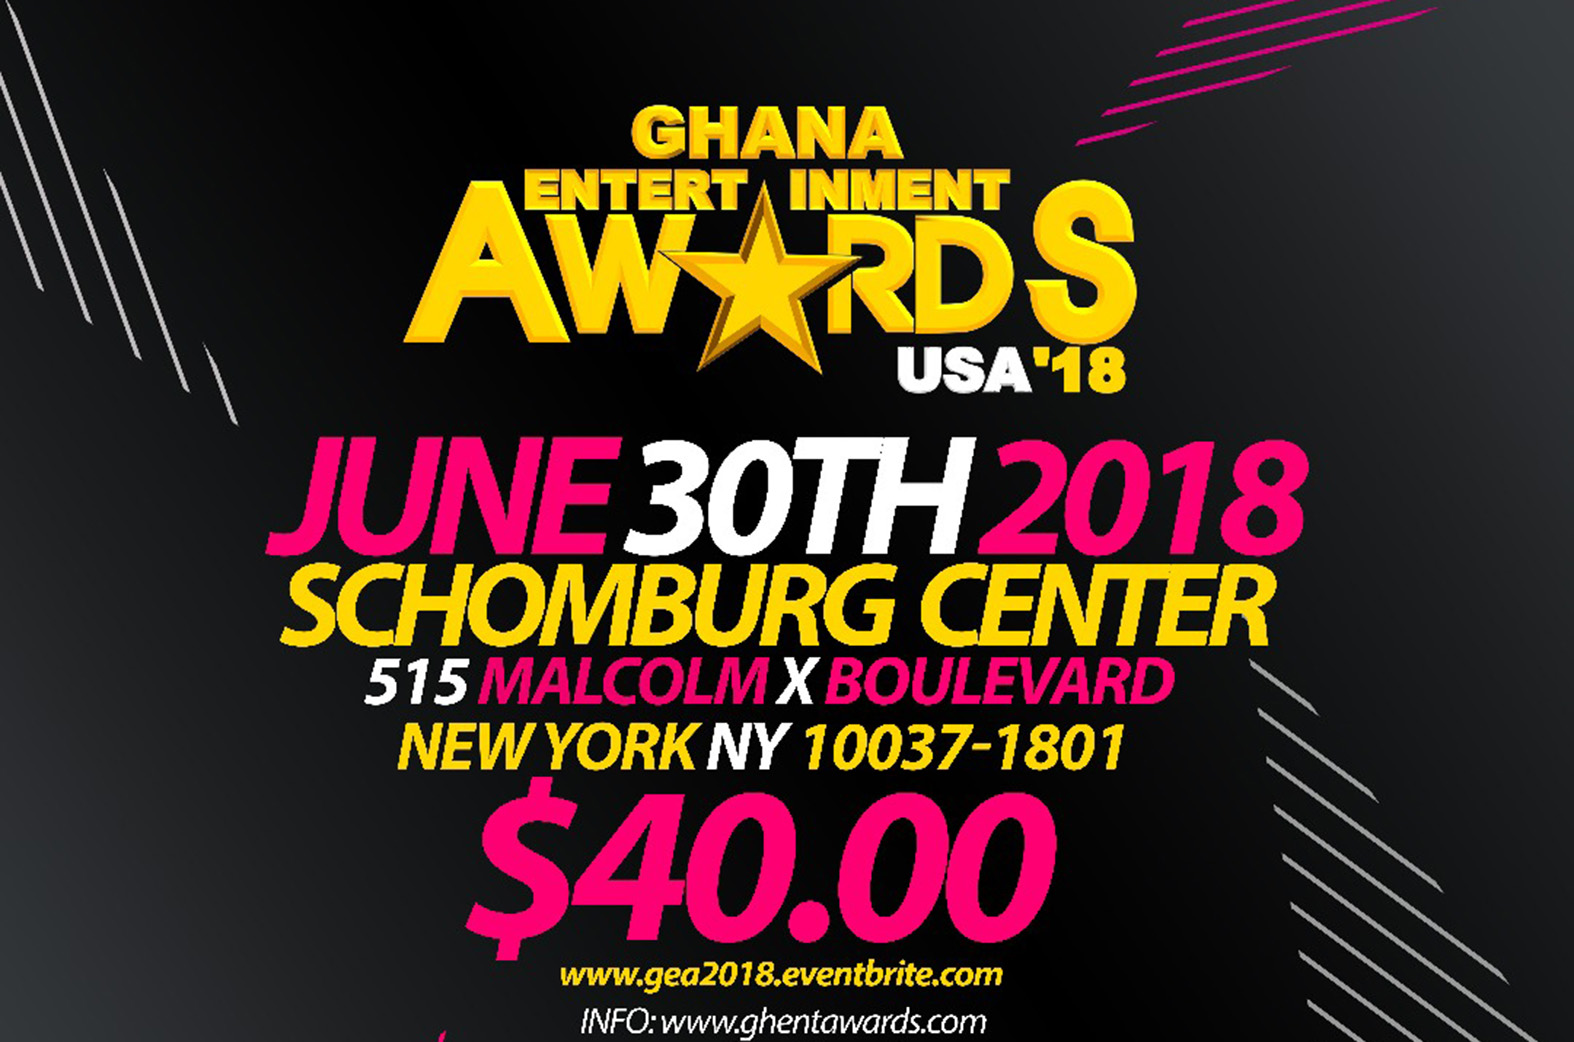 Here are the nominees for the 2018 Ghana Entertainment Awards USA